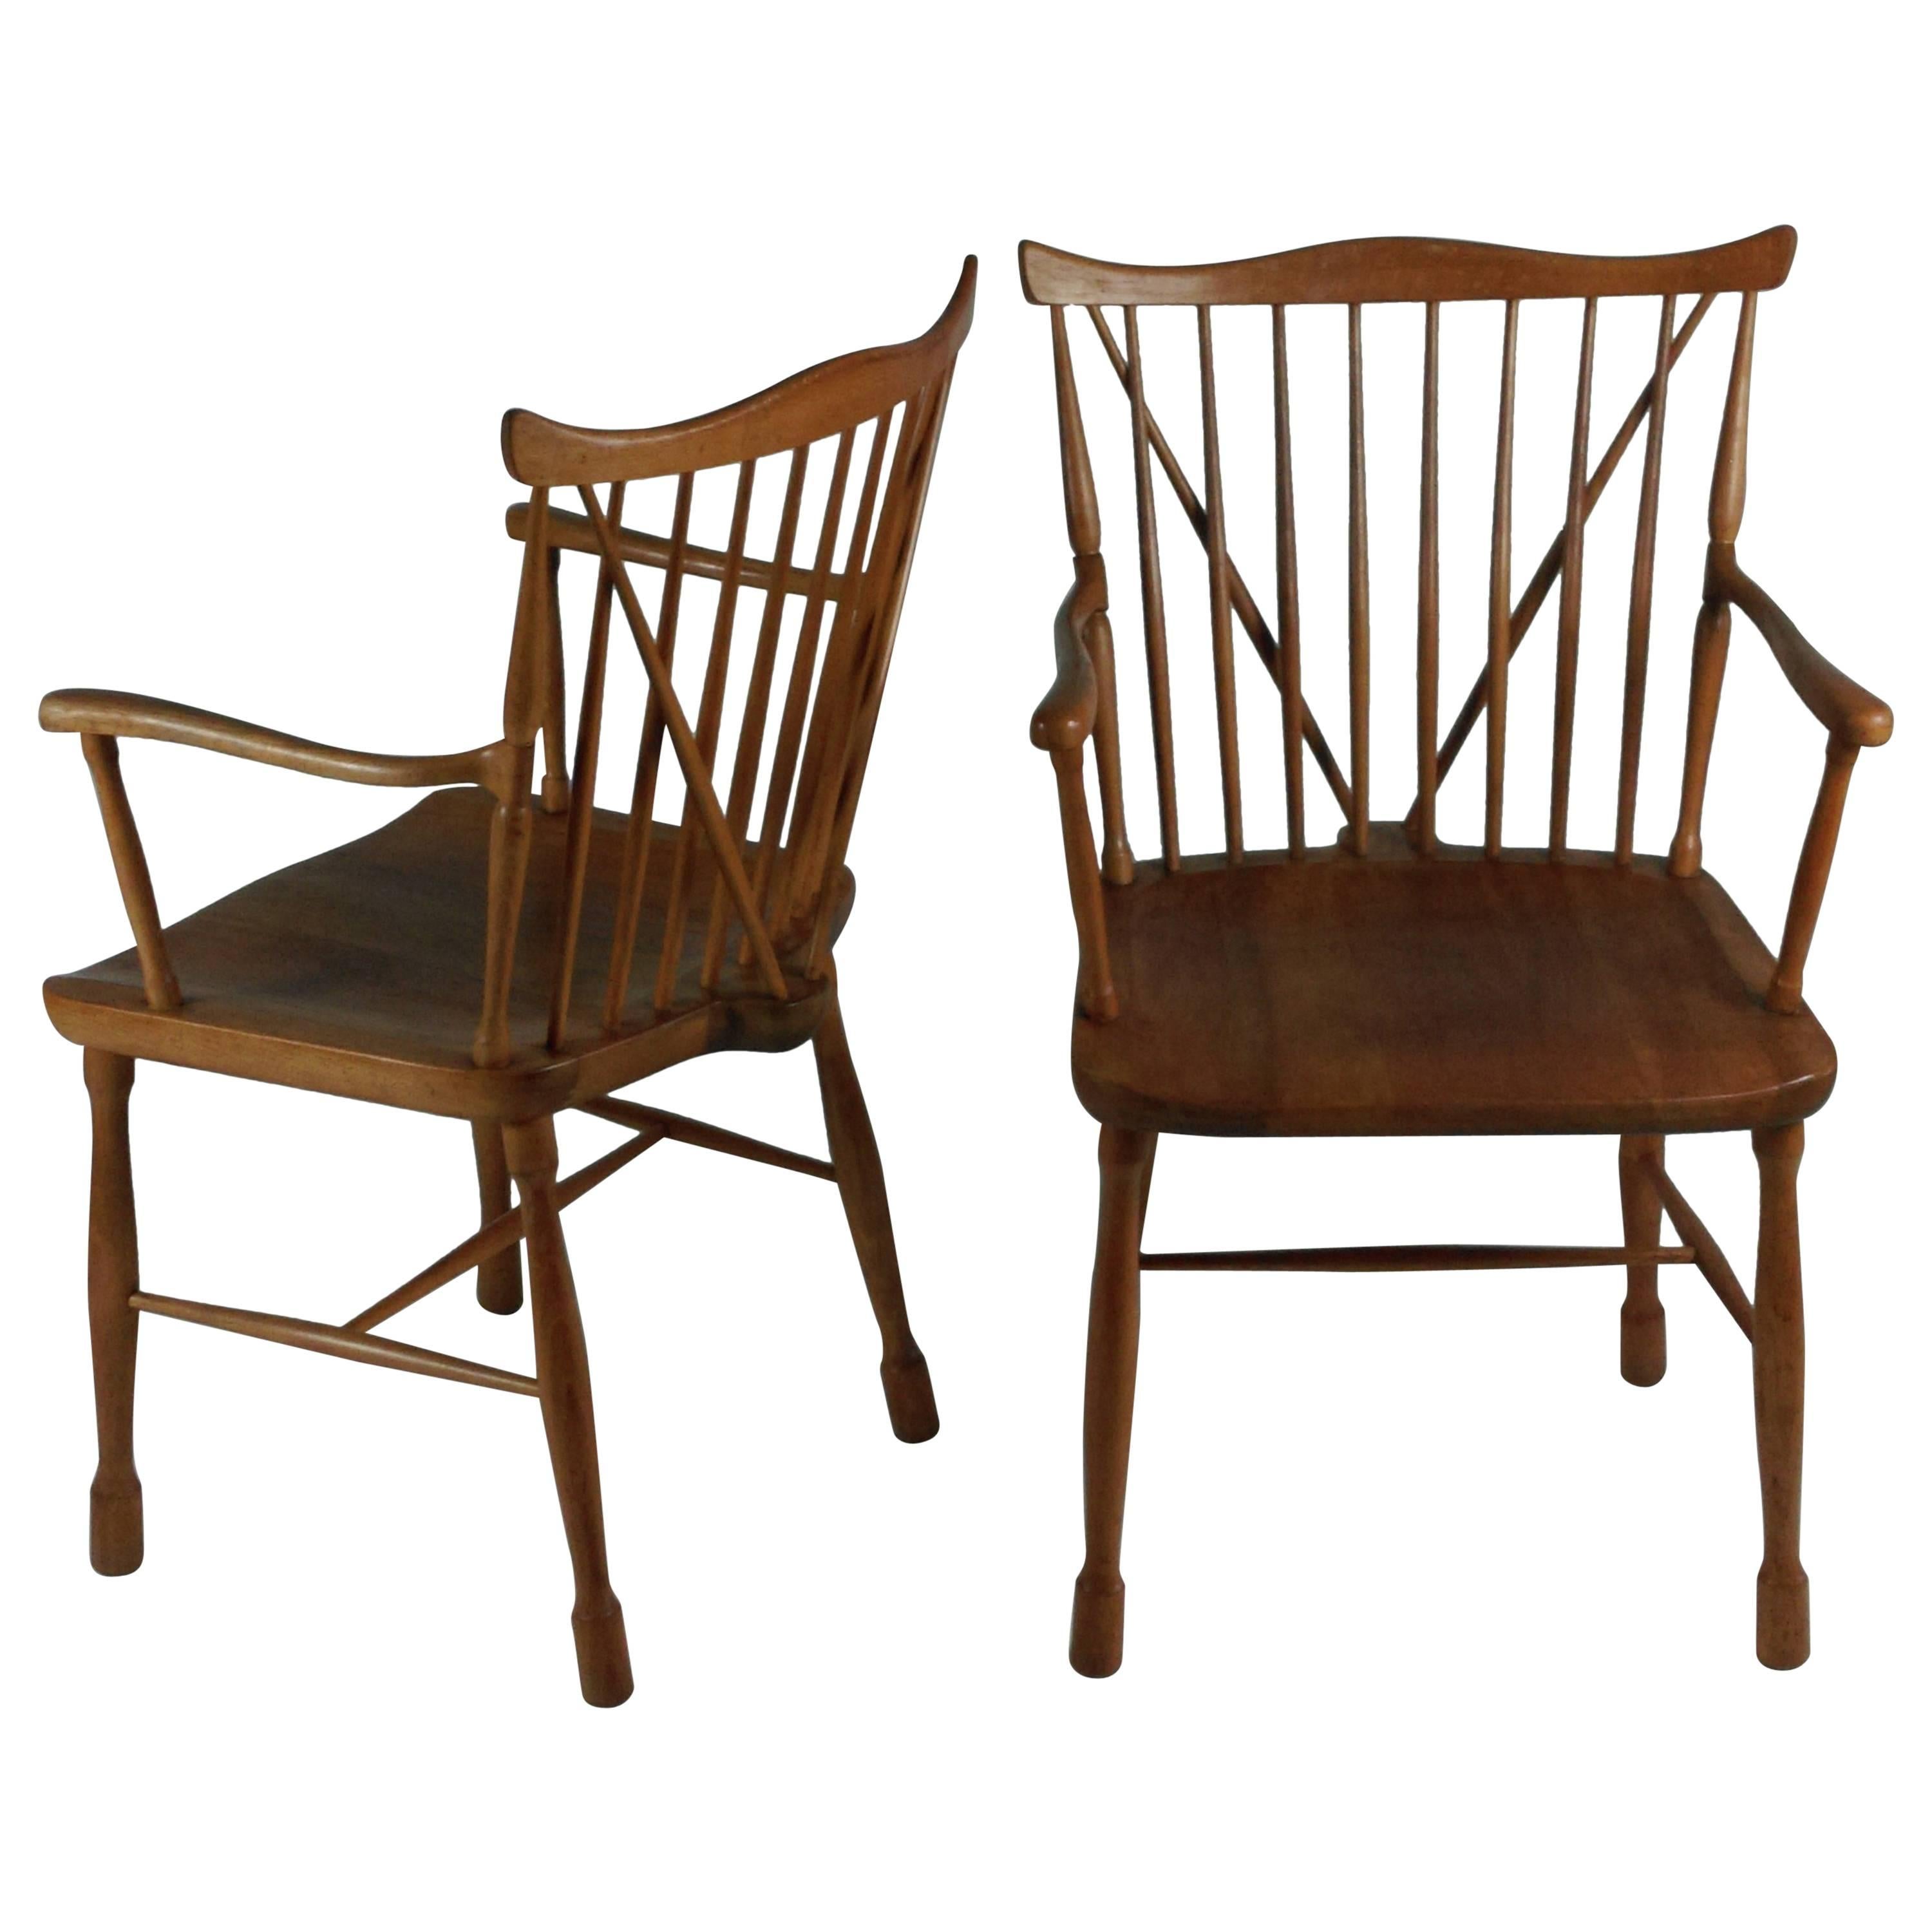 1940s Ole Wanscher Set of Two Windsor Chairs in Beech and Elm by Fritz Hansen